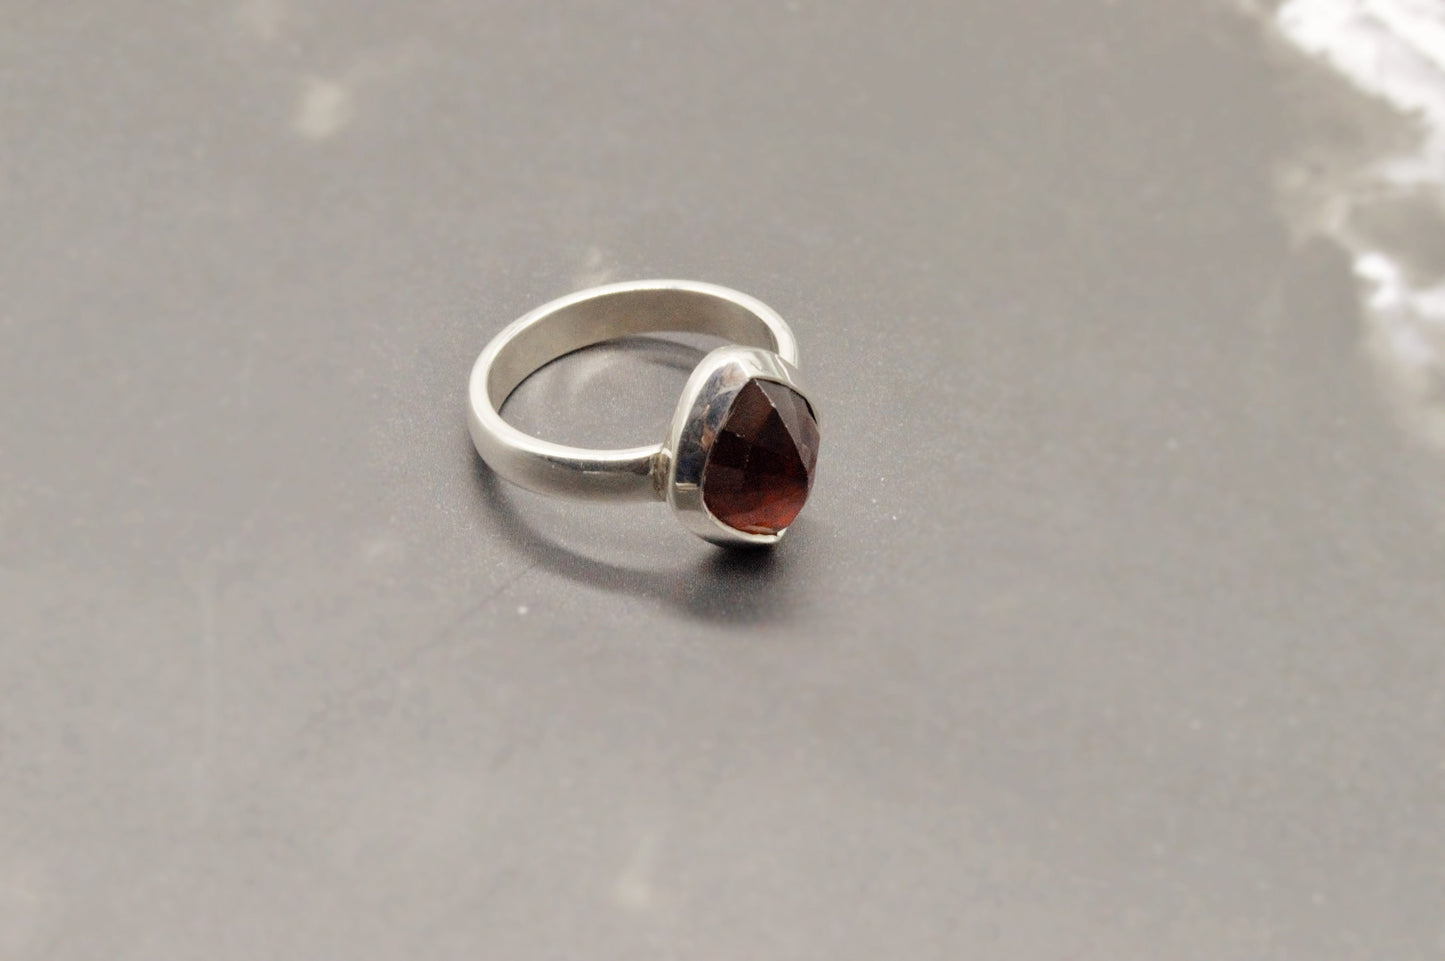 Garnet Ring Sterling Silver, UK Size N, Garnet Jewelry, Dainty Red Gemstone Ring, Stacking Ring, January Birthstone, Birthday Gifts For Her